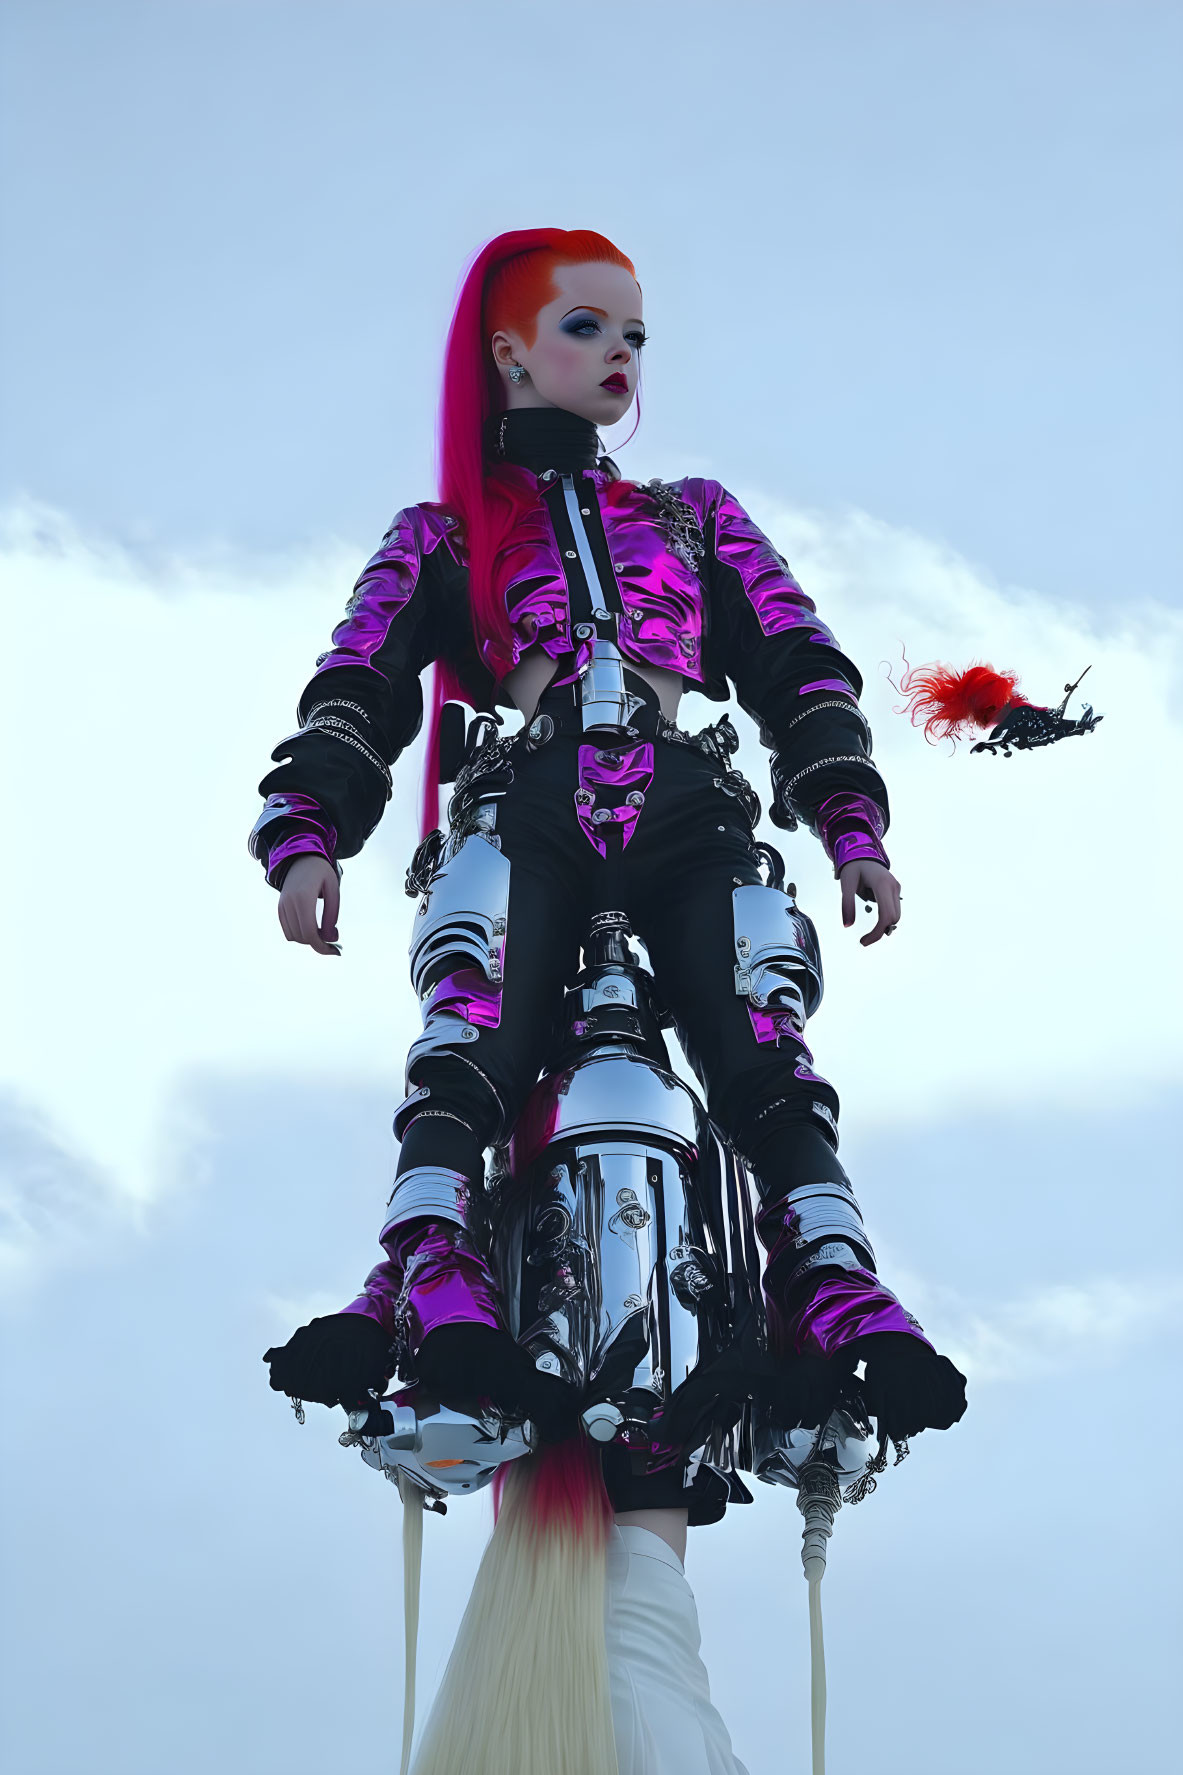 Colorful Stilt-Walker in Futuristic Pink and Black Outfit